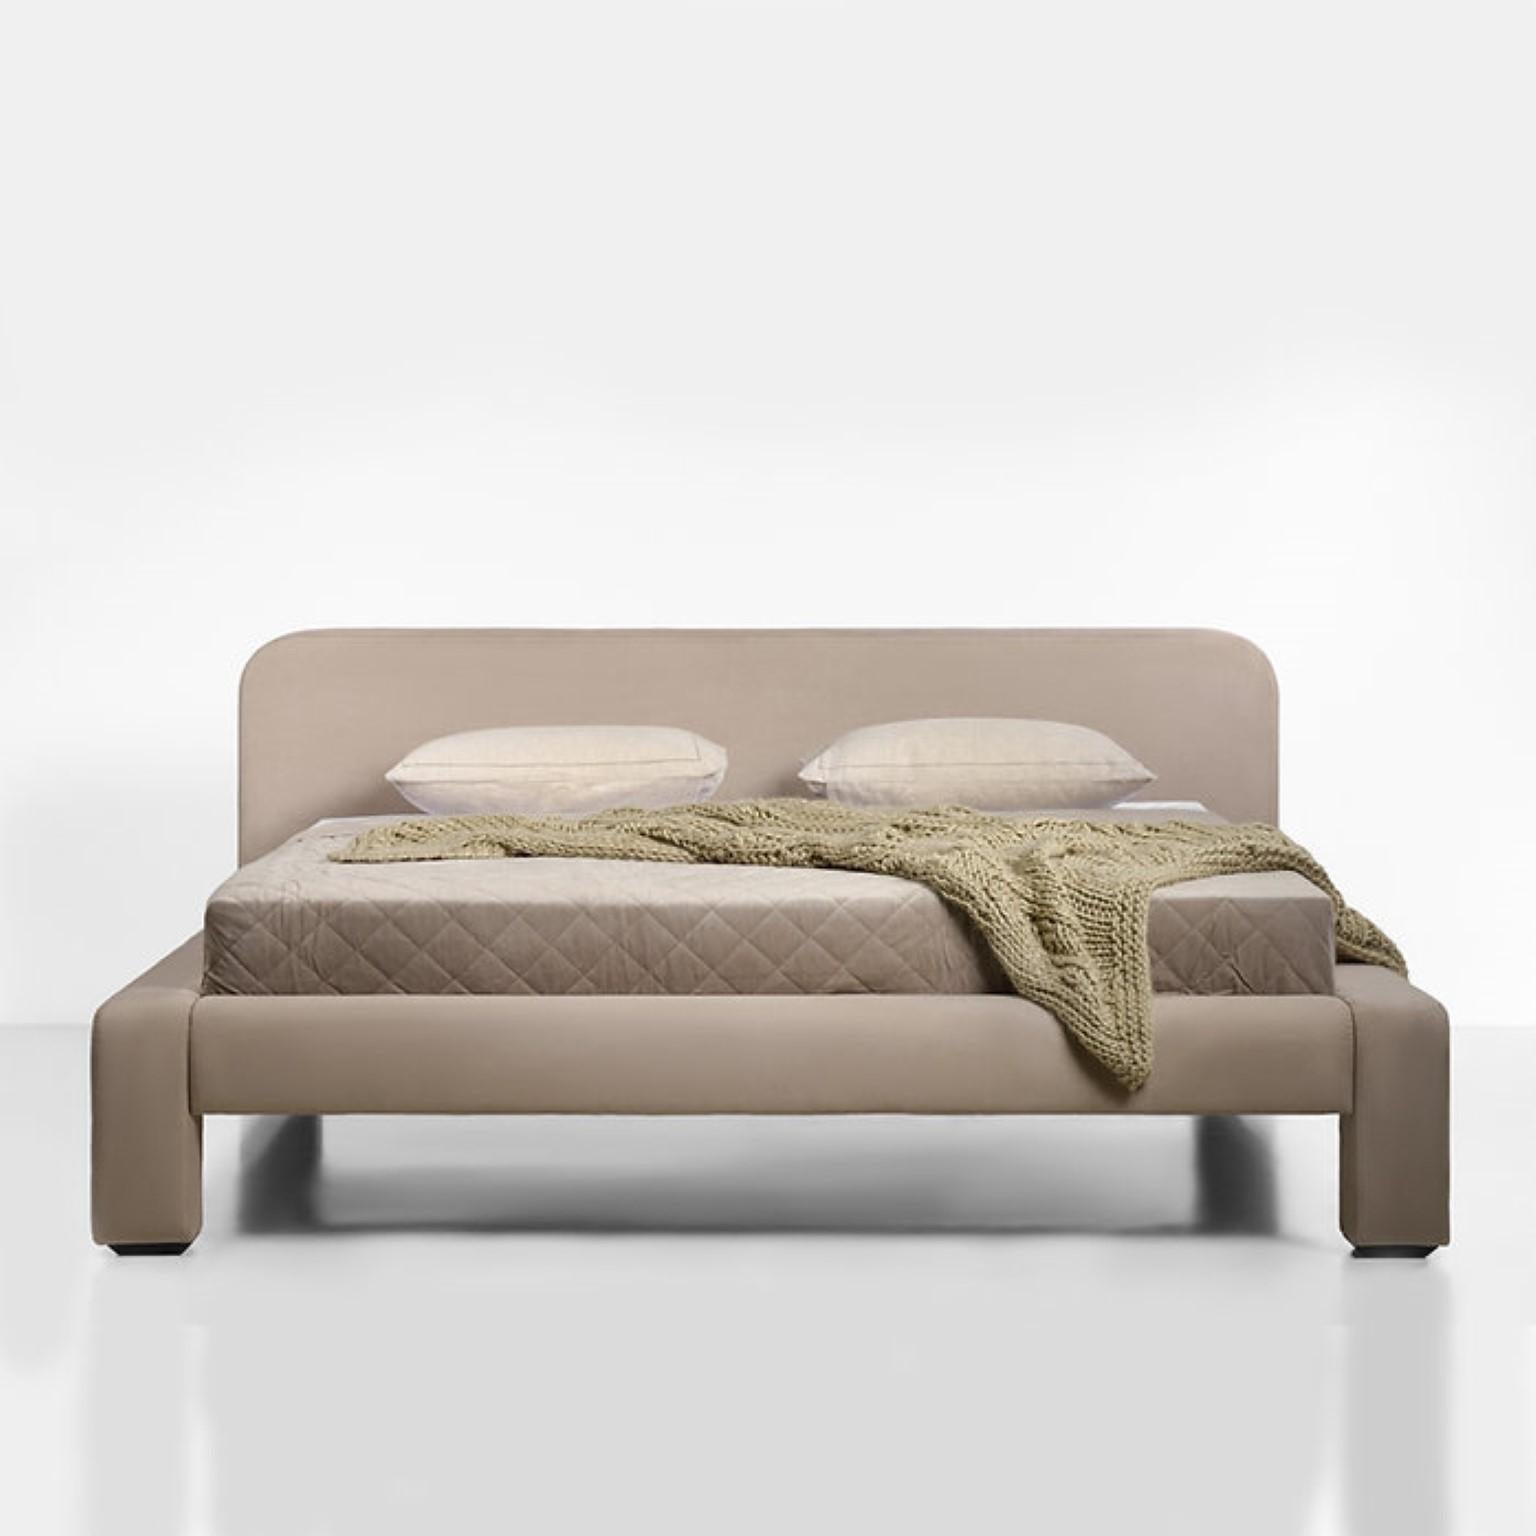 Contemporary bed by Faina
Design: Victoriya Yakusha
Material: textiles, foamrubber, sintepon
Dimensions: 192 x 232 x 93 cm 
Weight: 120 kg

Other sizes available.


 
In search of new-old design messages, Victoria Yakusha conducted a study